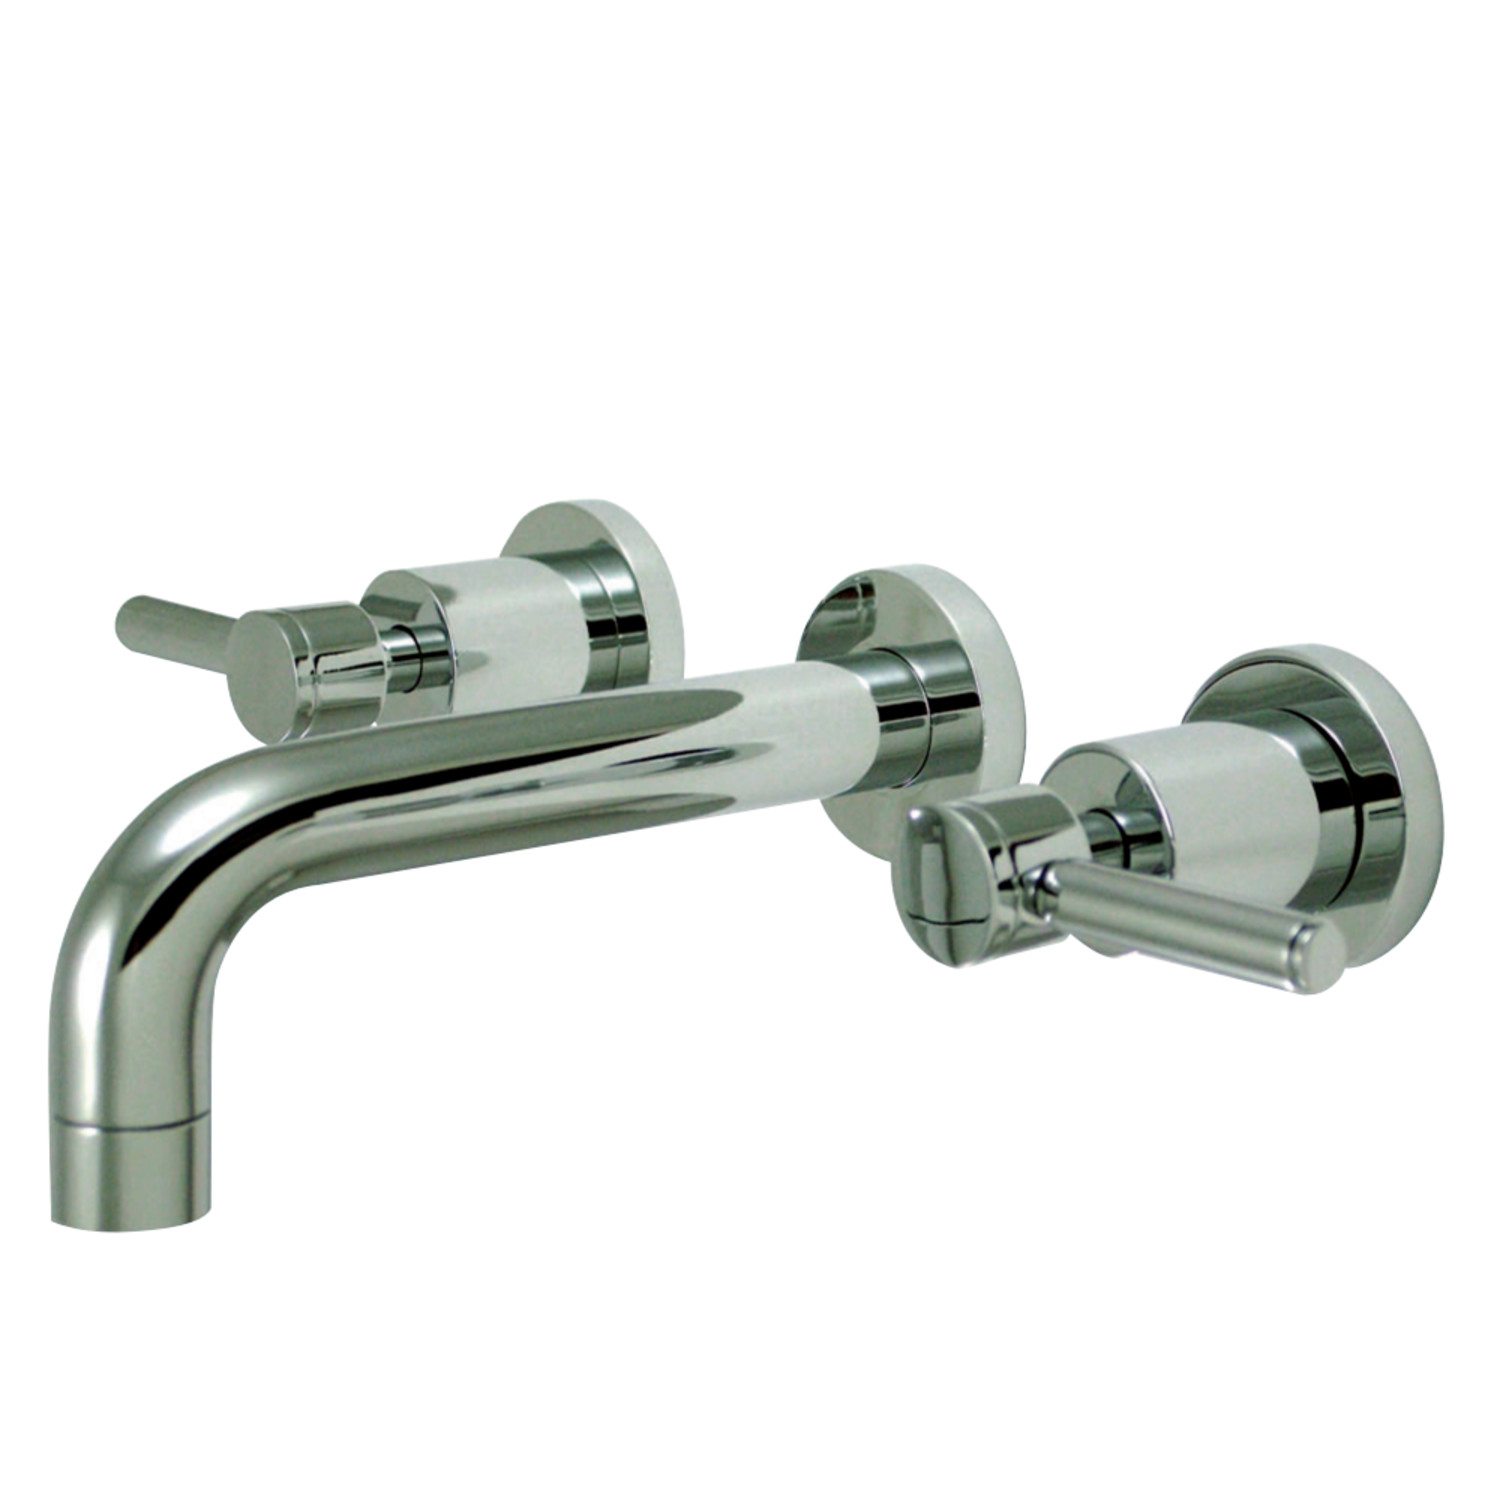 Kingston Brass KS8121DL Concord 2-Handle Wall Mount Bathroom Faucet, Polished Chrome - image 1 of 2